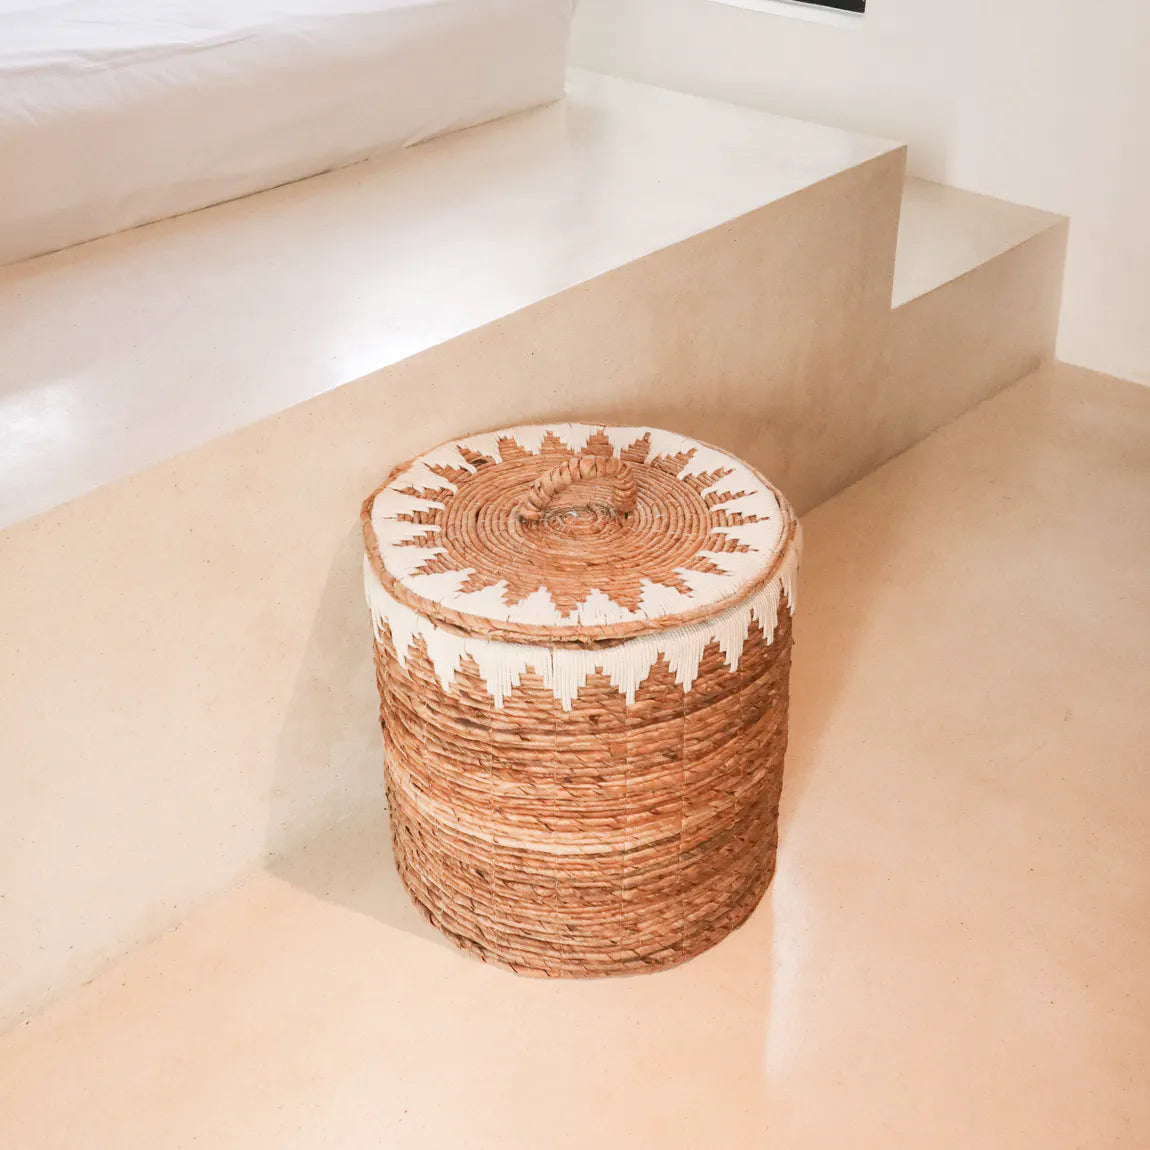 Empat Laundry Basket By Soeji Available in 2 Sizes